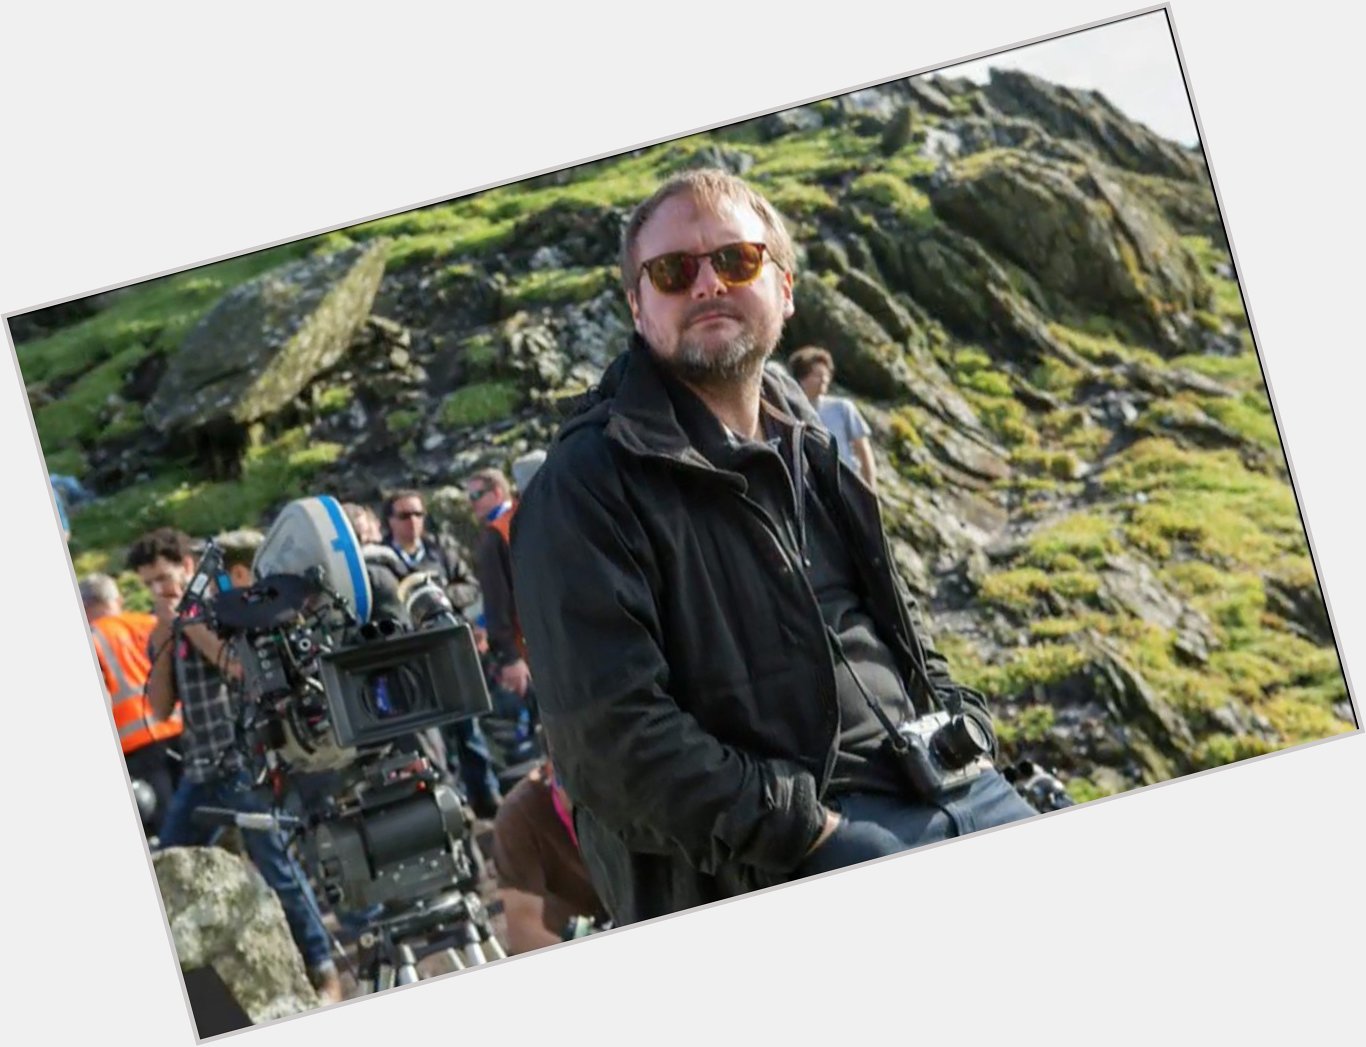 Anyhow, a sincere happy birthday Rian Johnson!

Nothing but respect for MY favorite Star Wars director 